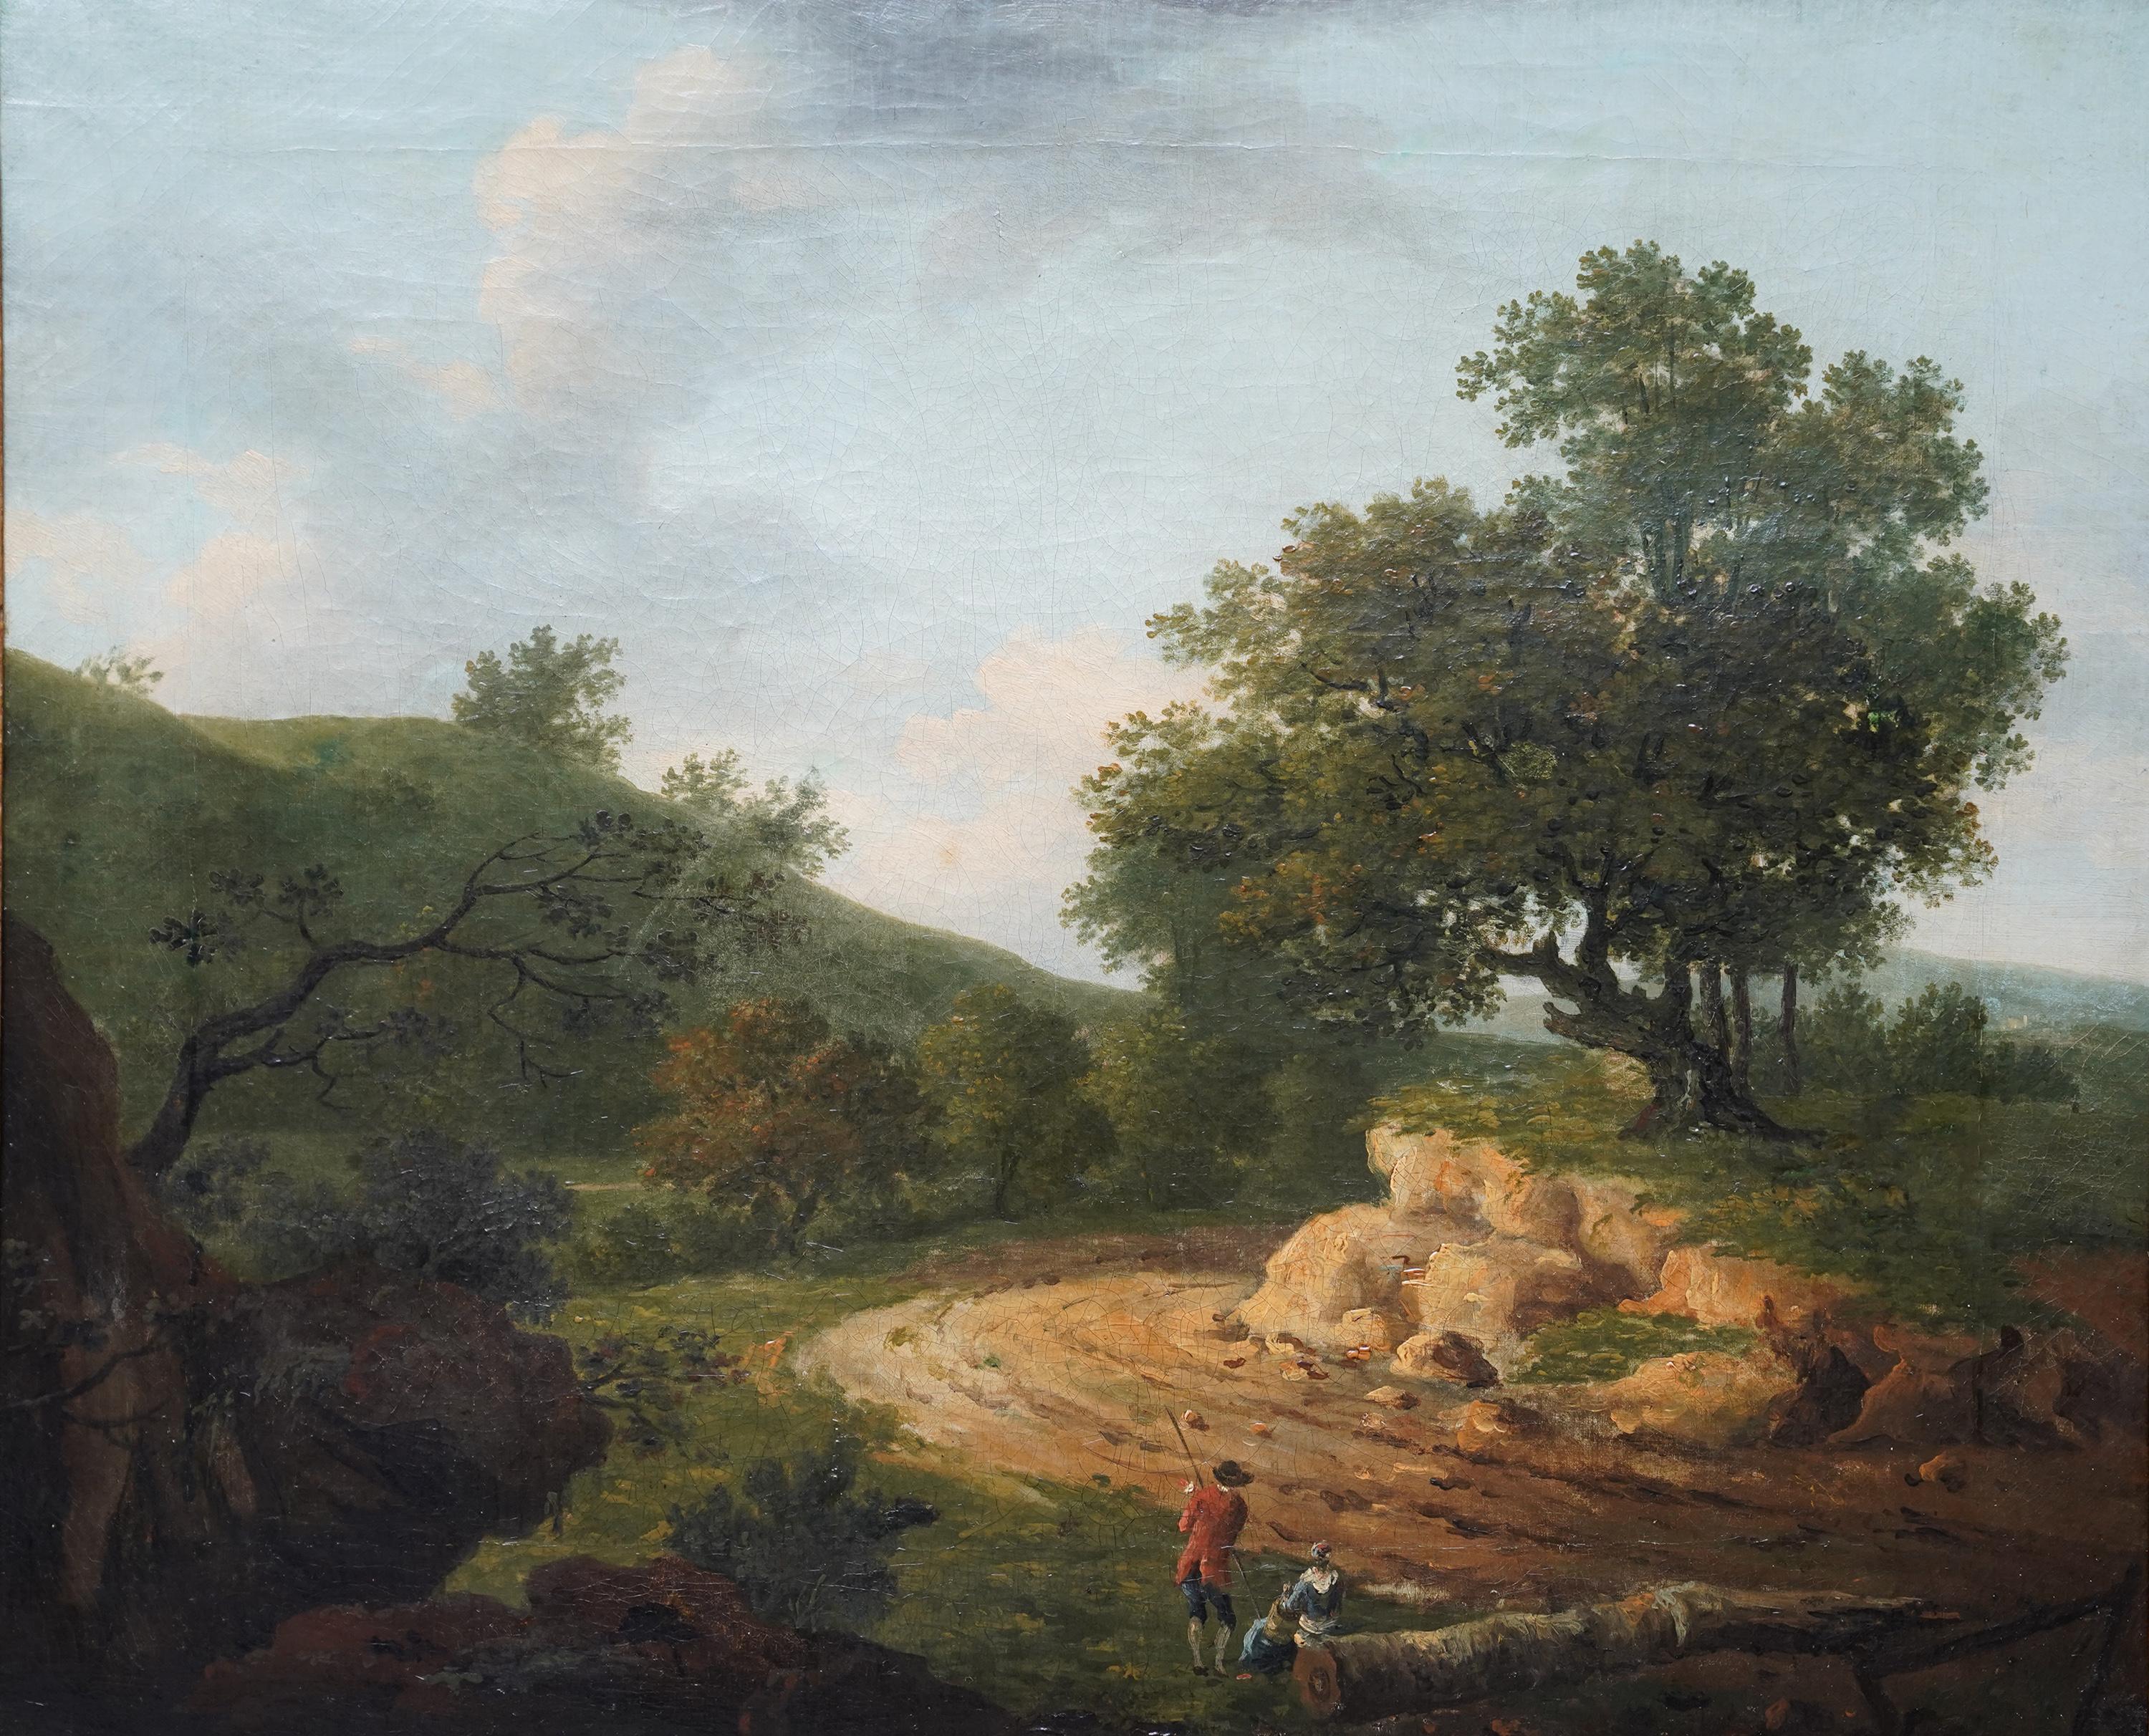 Wooded Landscape with Figures - British 18th century Old Master art oil painting - Painting by Richard Wilson